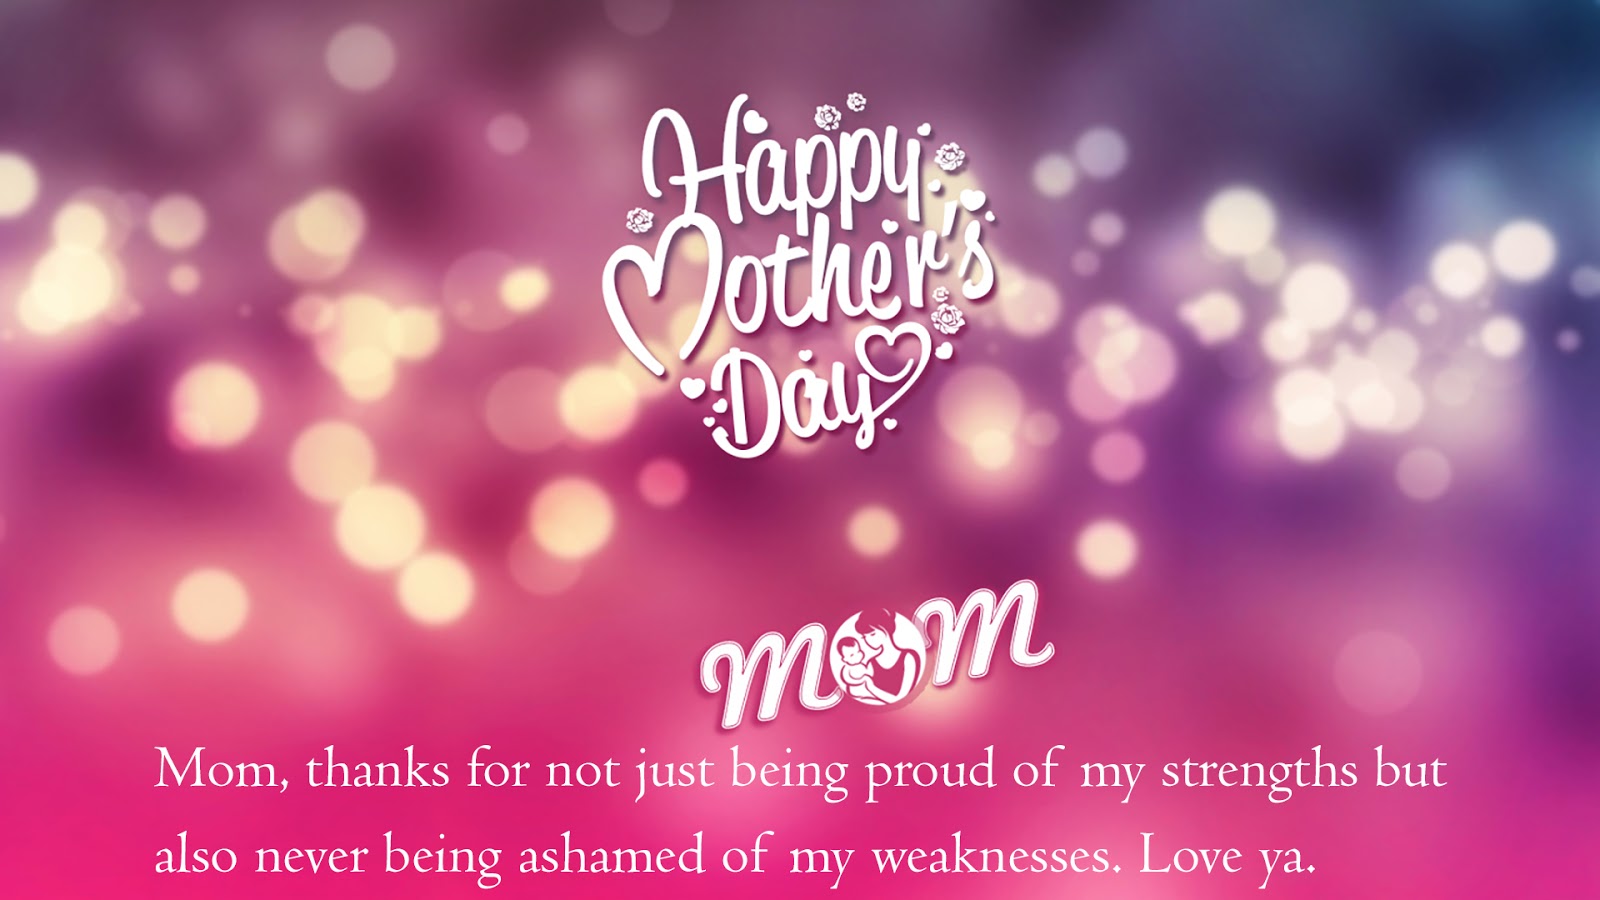 Happy Mother s Day Wallpapers Greetings Cards Ecards 2017